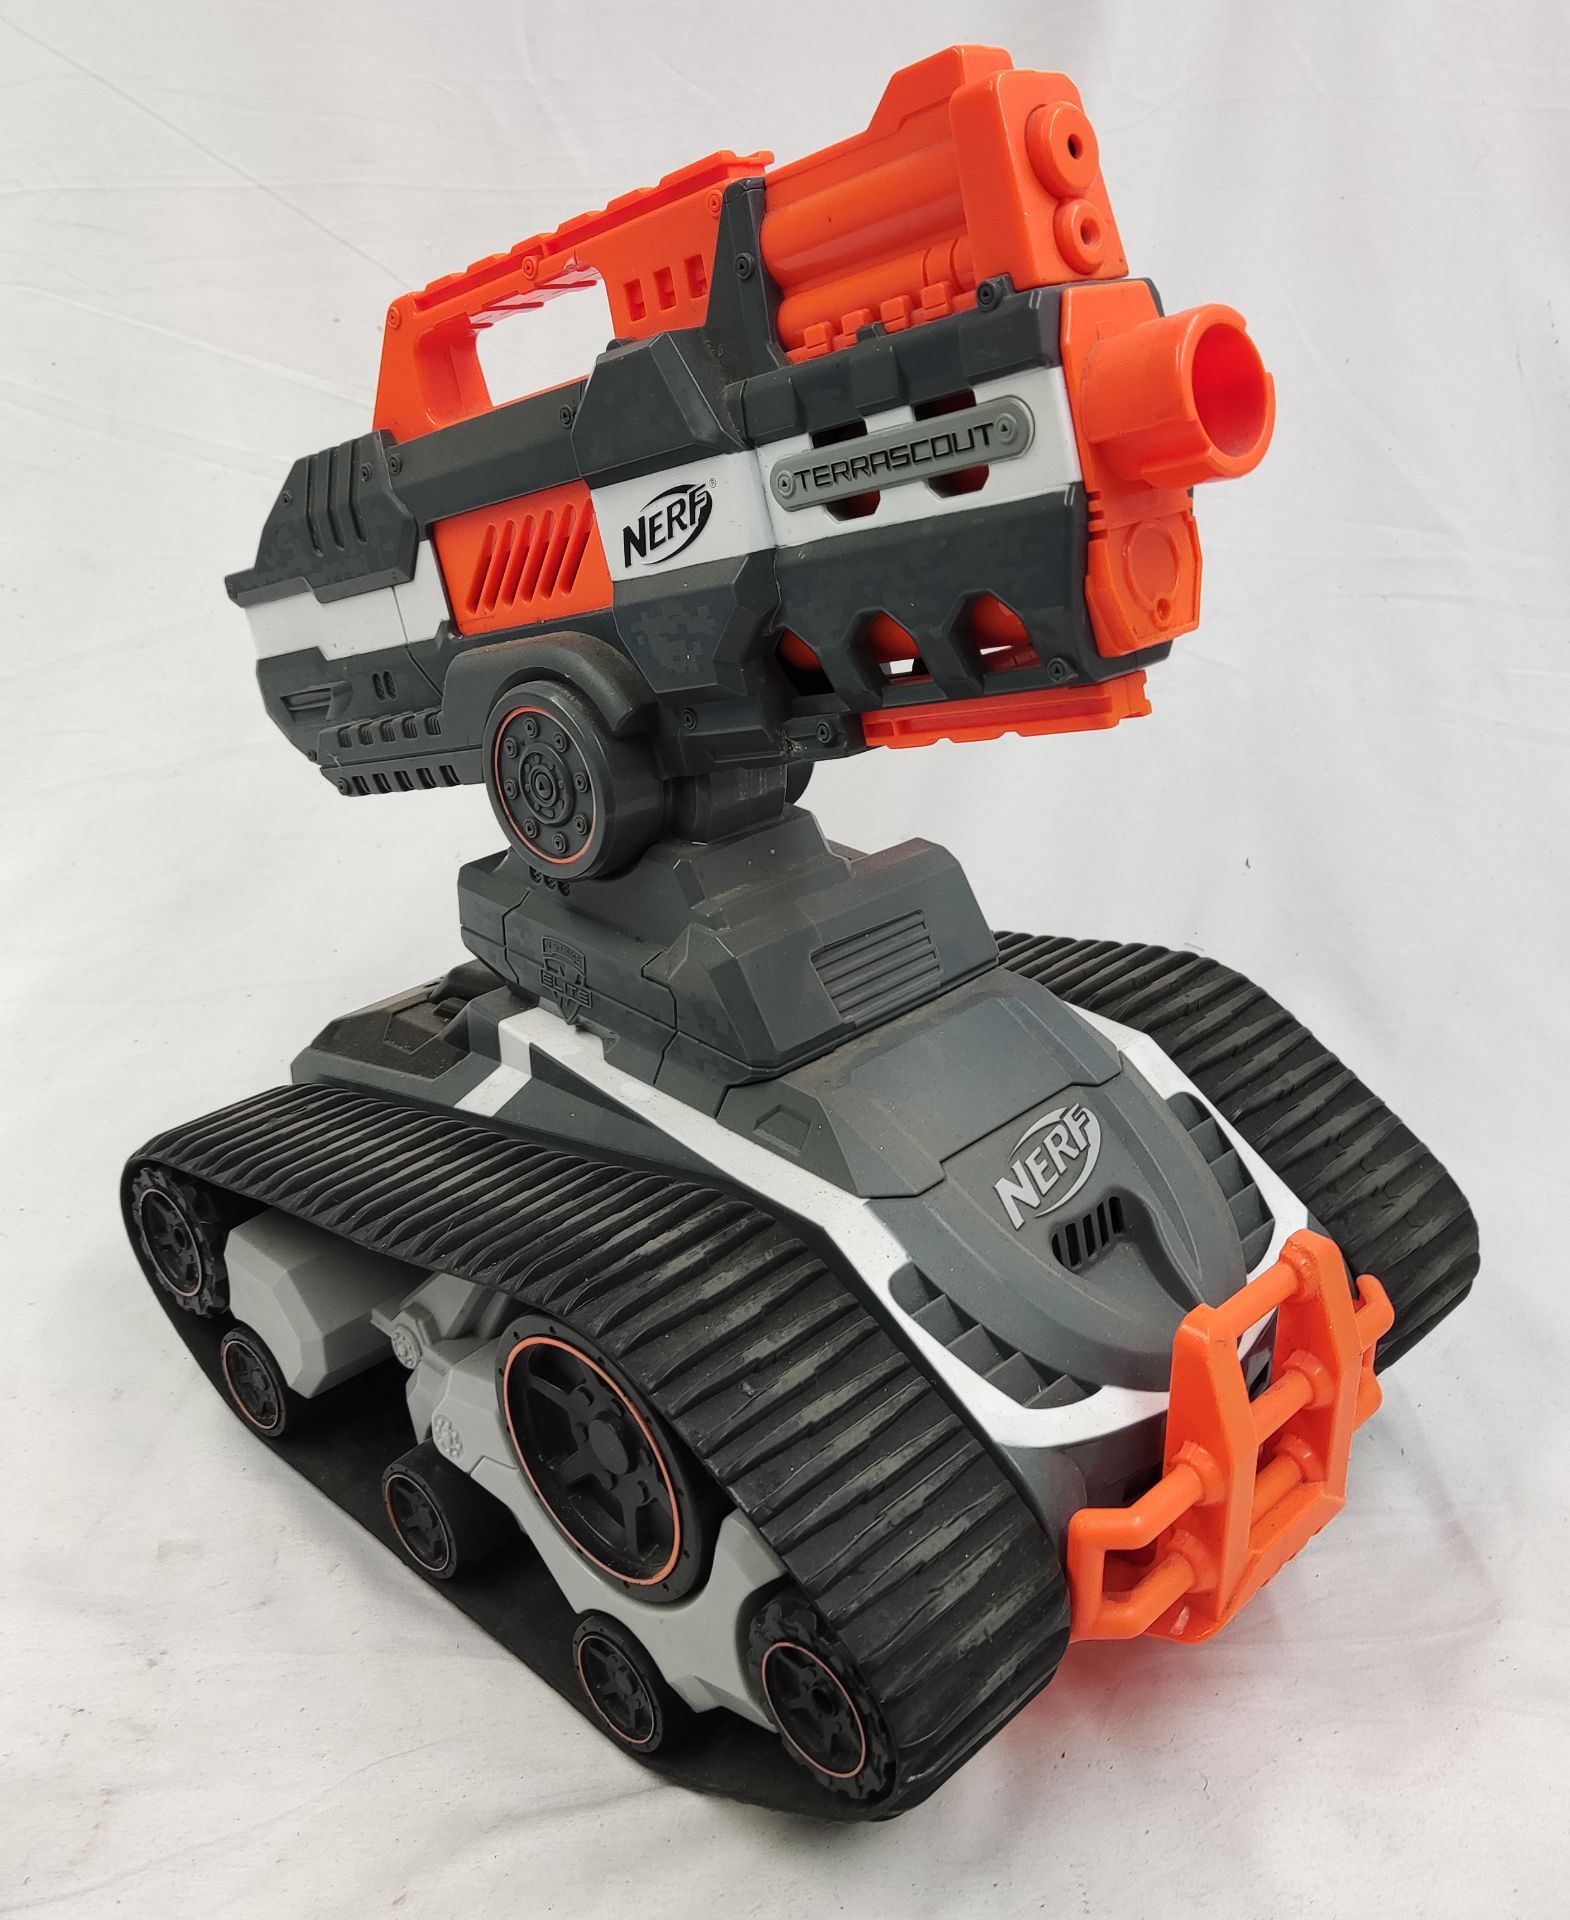 1 x Nerf Terrascout Remote Control Nerf Tank With Video - Used - CL444 - NO VAT ON THE HAMMER - - Image 2 of 14